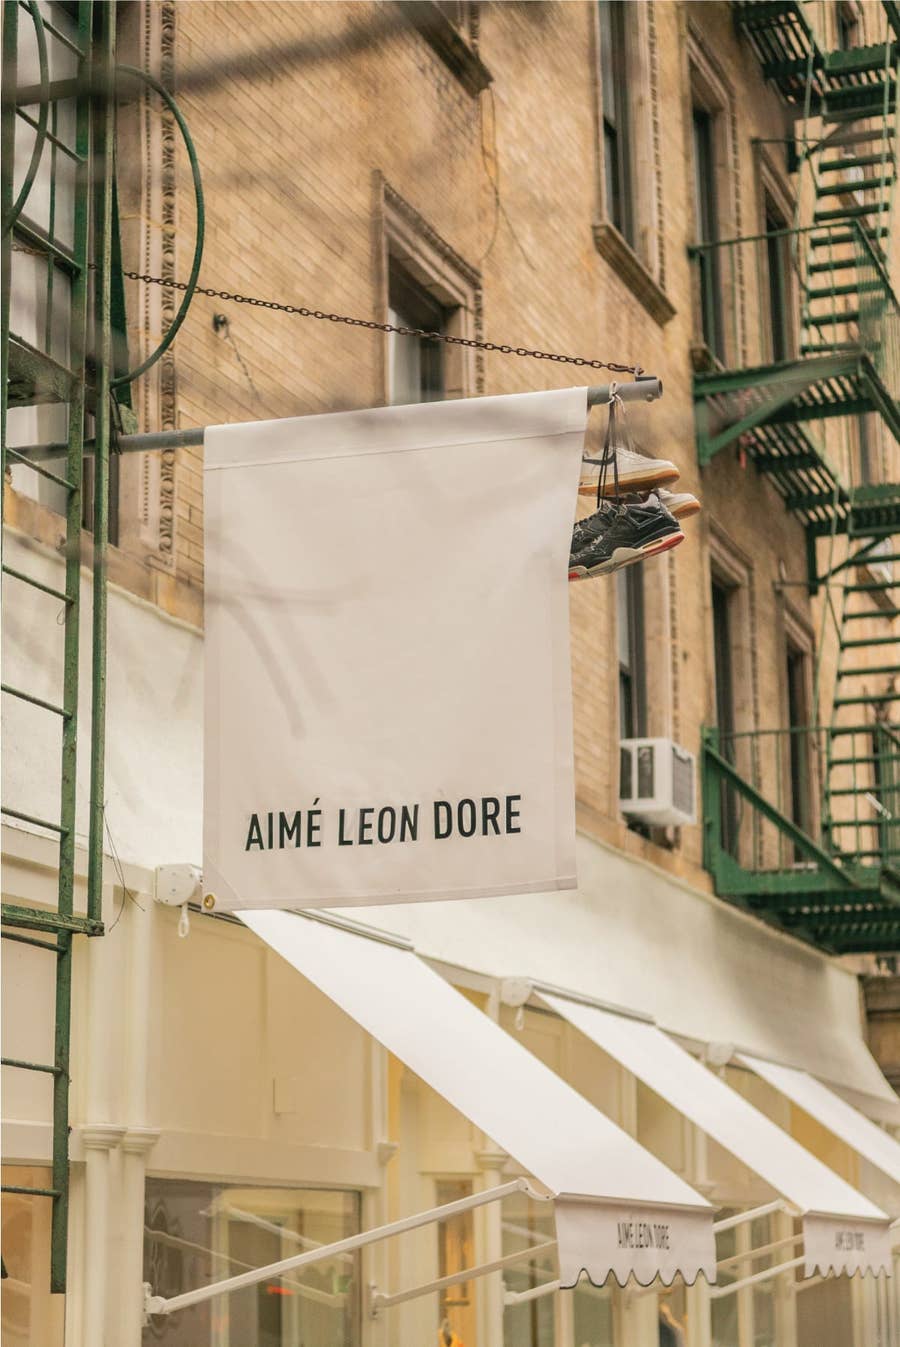 NYC's Aimé Leon Dore Opens New Greek Cafe in London's Soho - Eater